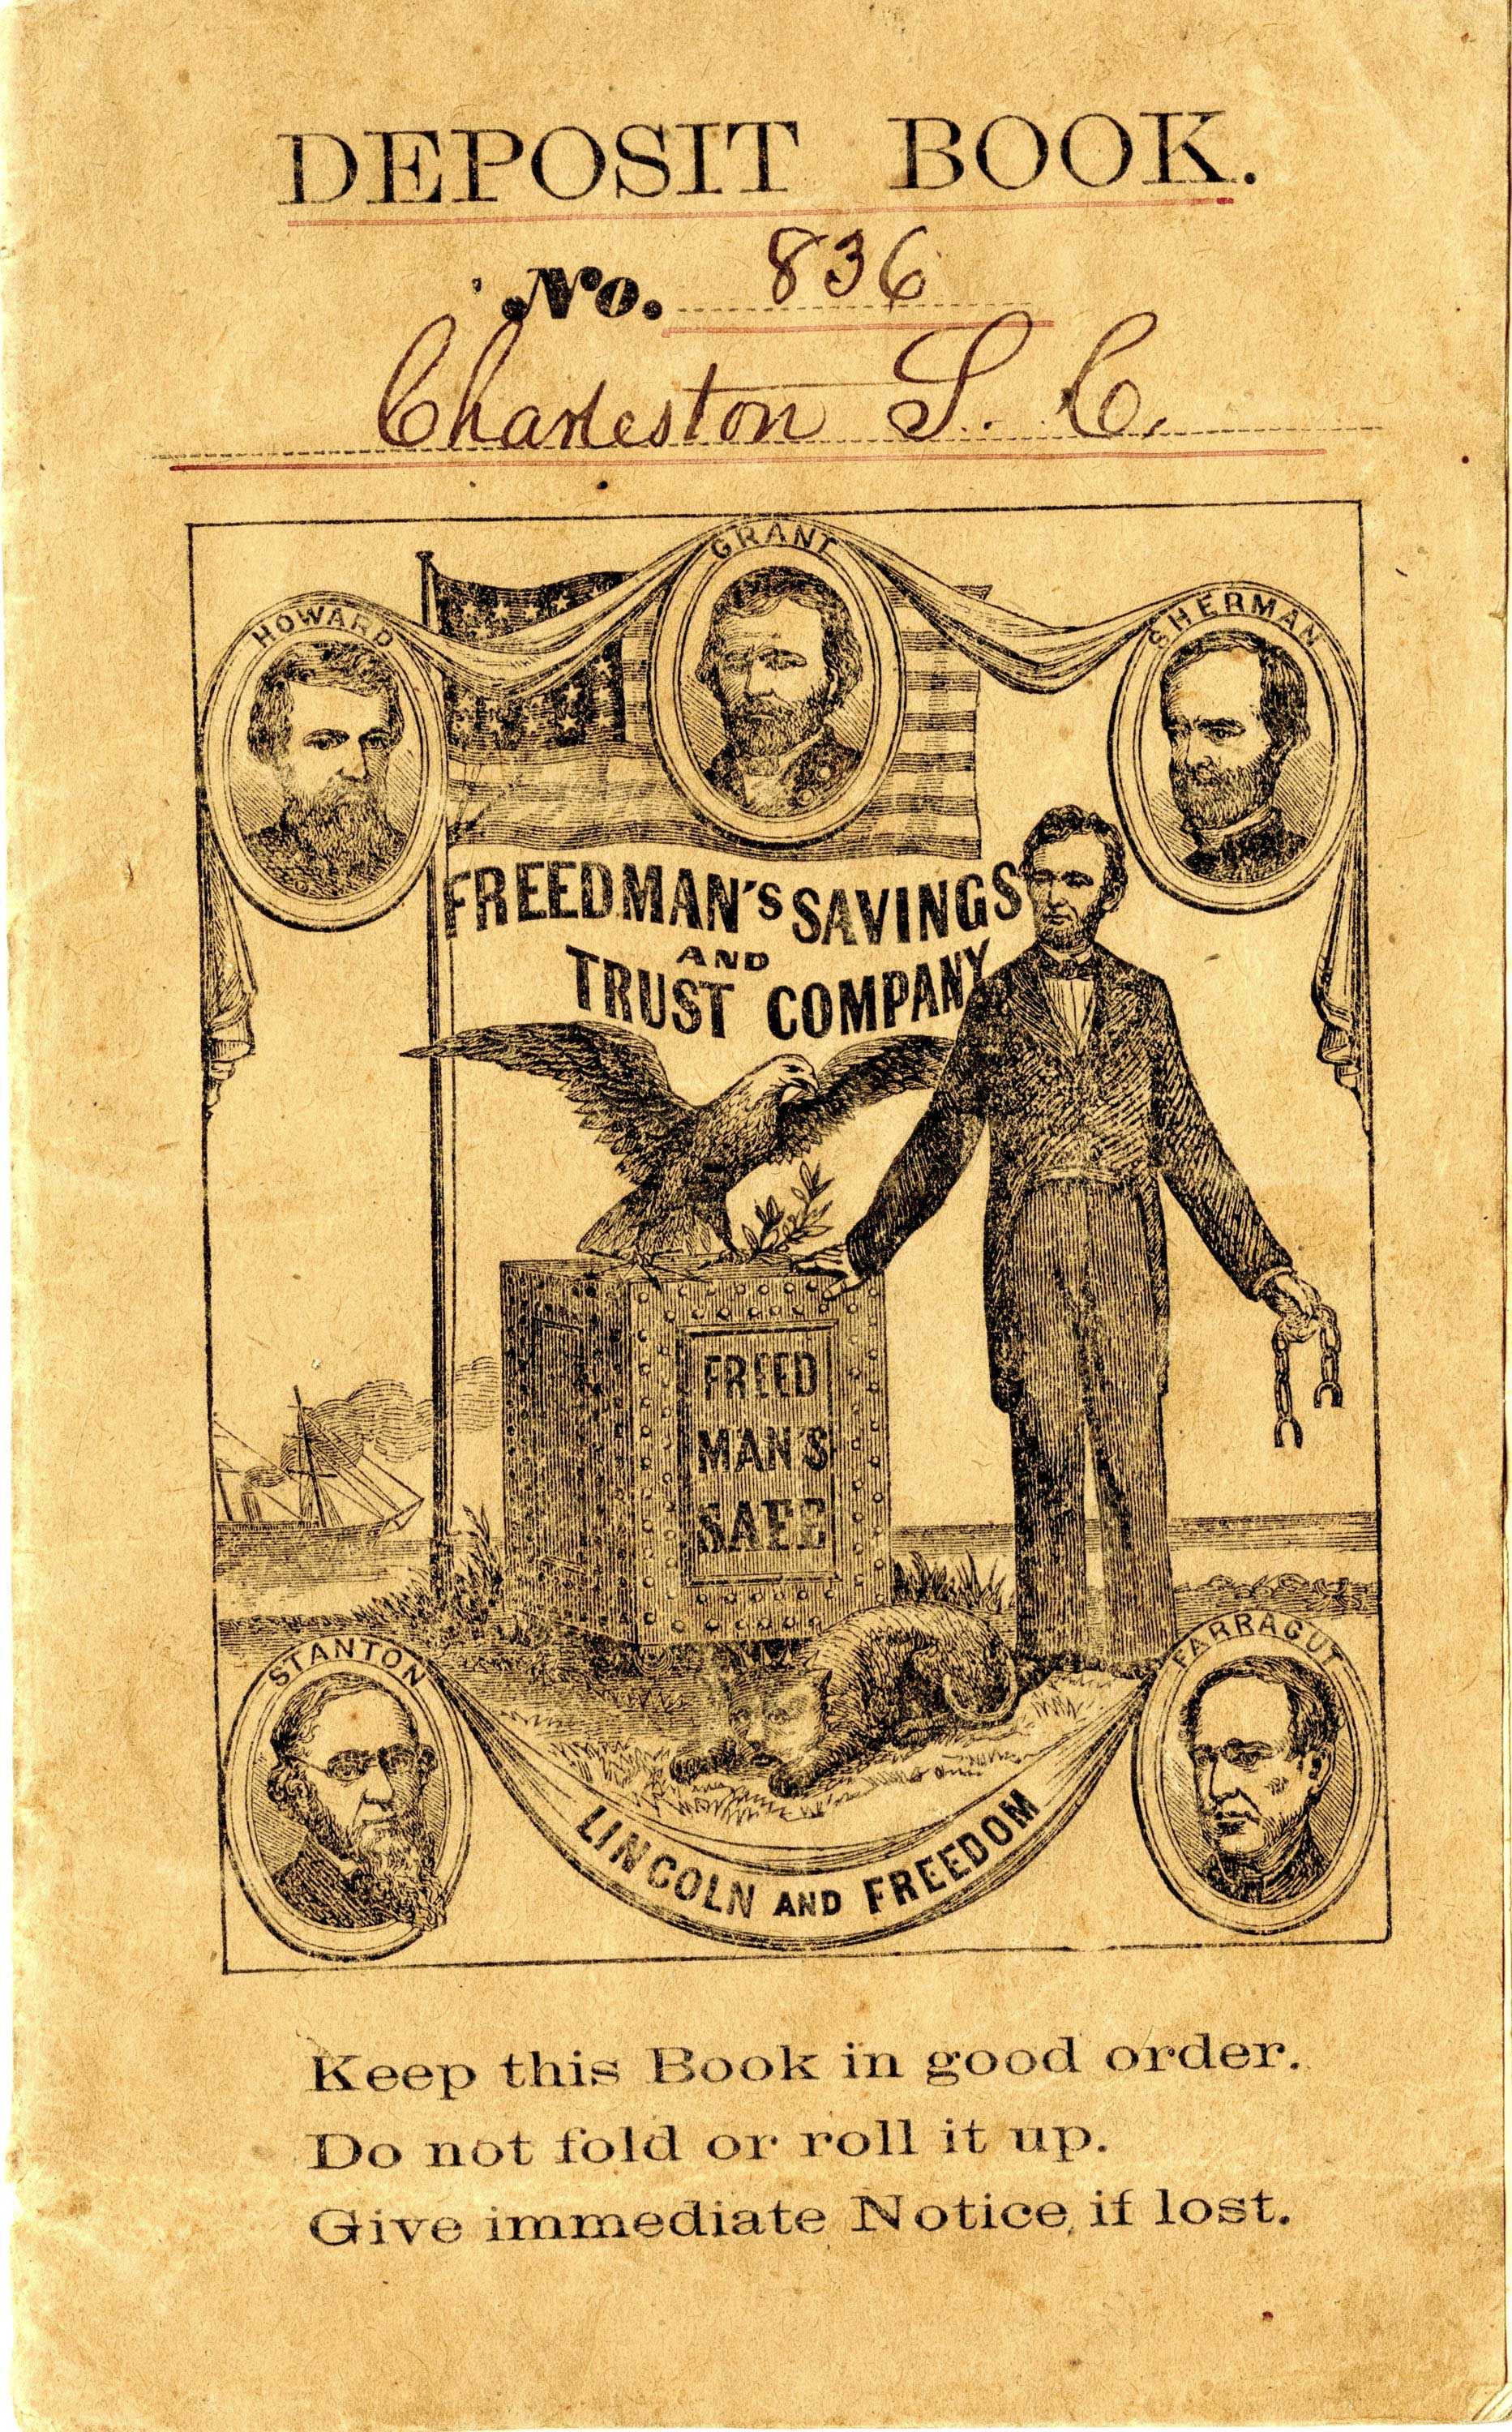 A cover of the Freedman’s Savings Bank deposit book. It is Book number 836 with a drawing of Lincoln and other political figures.